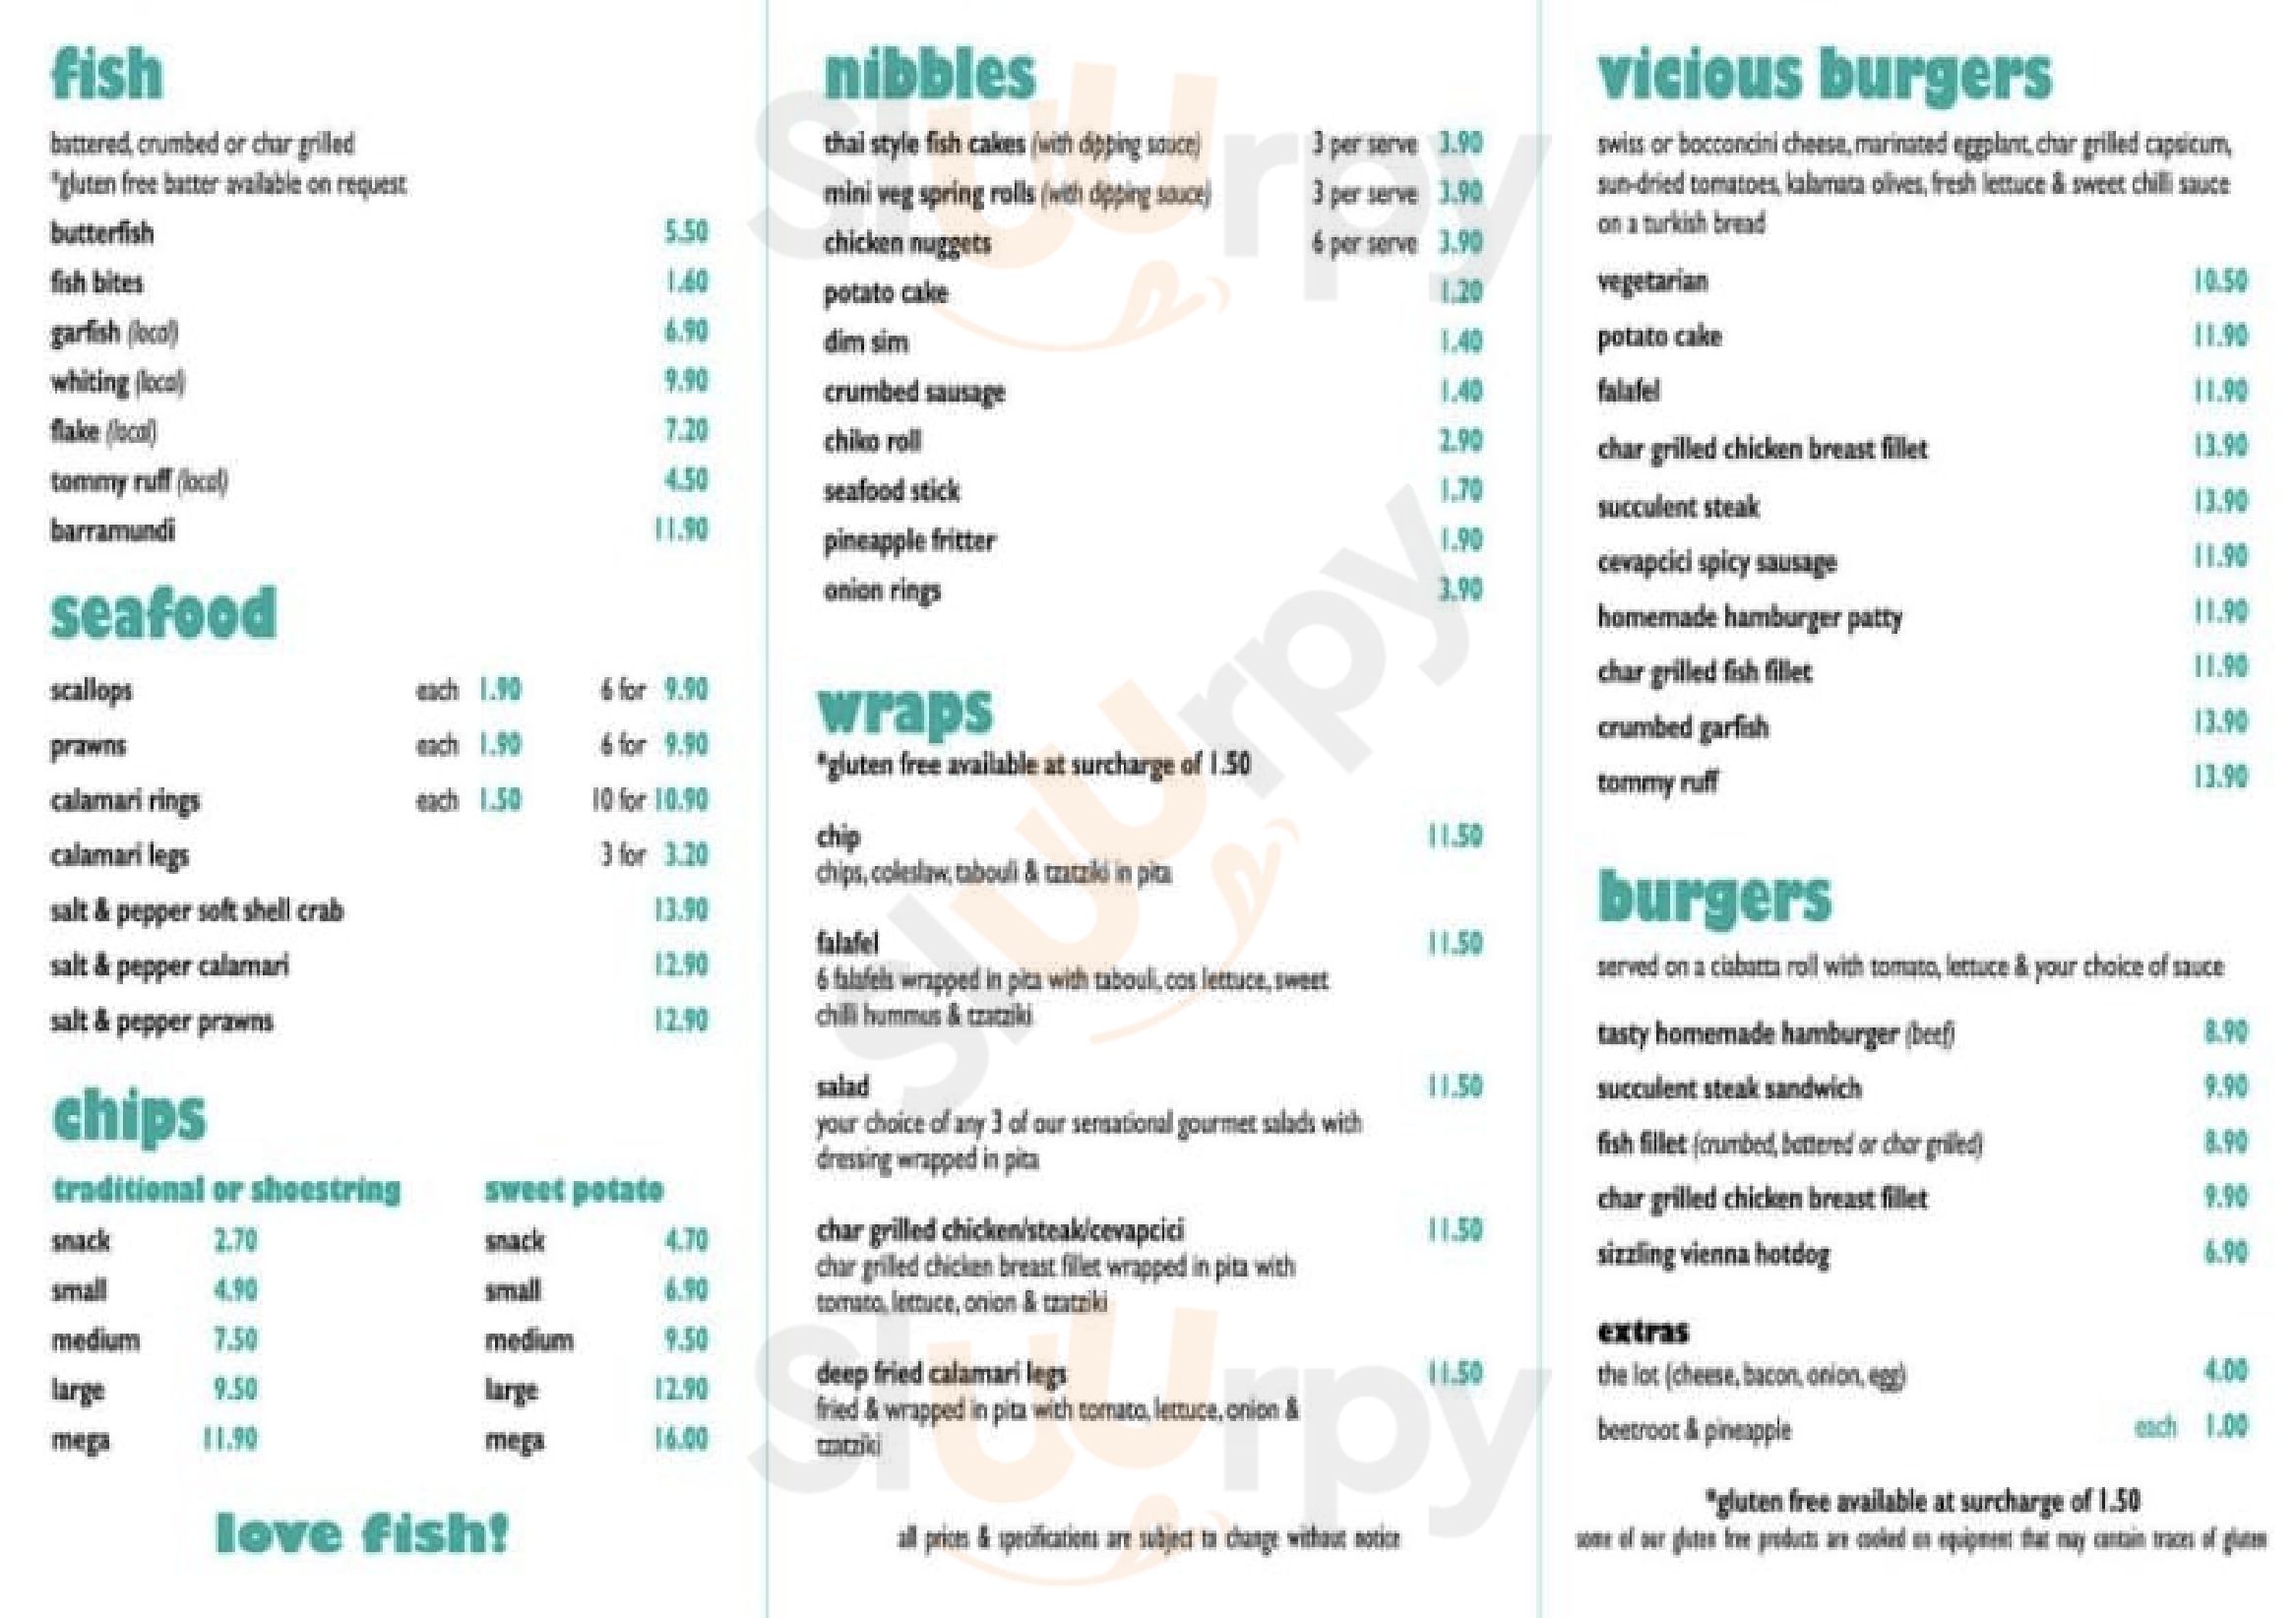 Fish Out Of Water Hyde Park Hyde Park Menu - 1